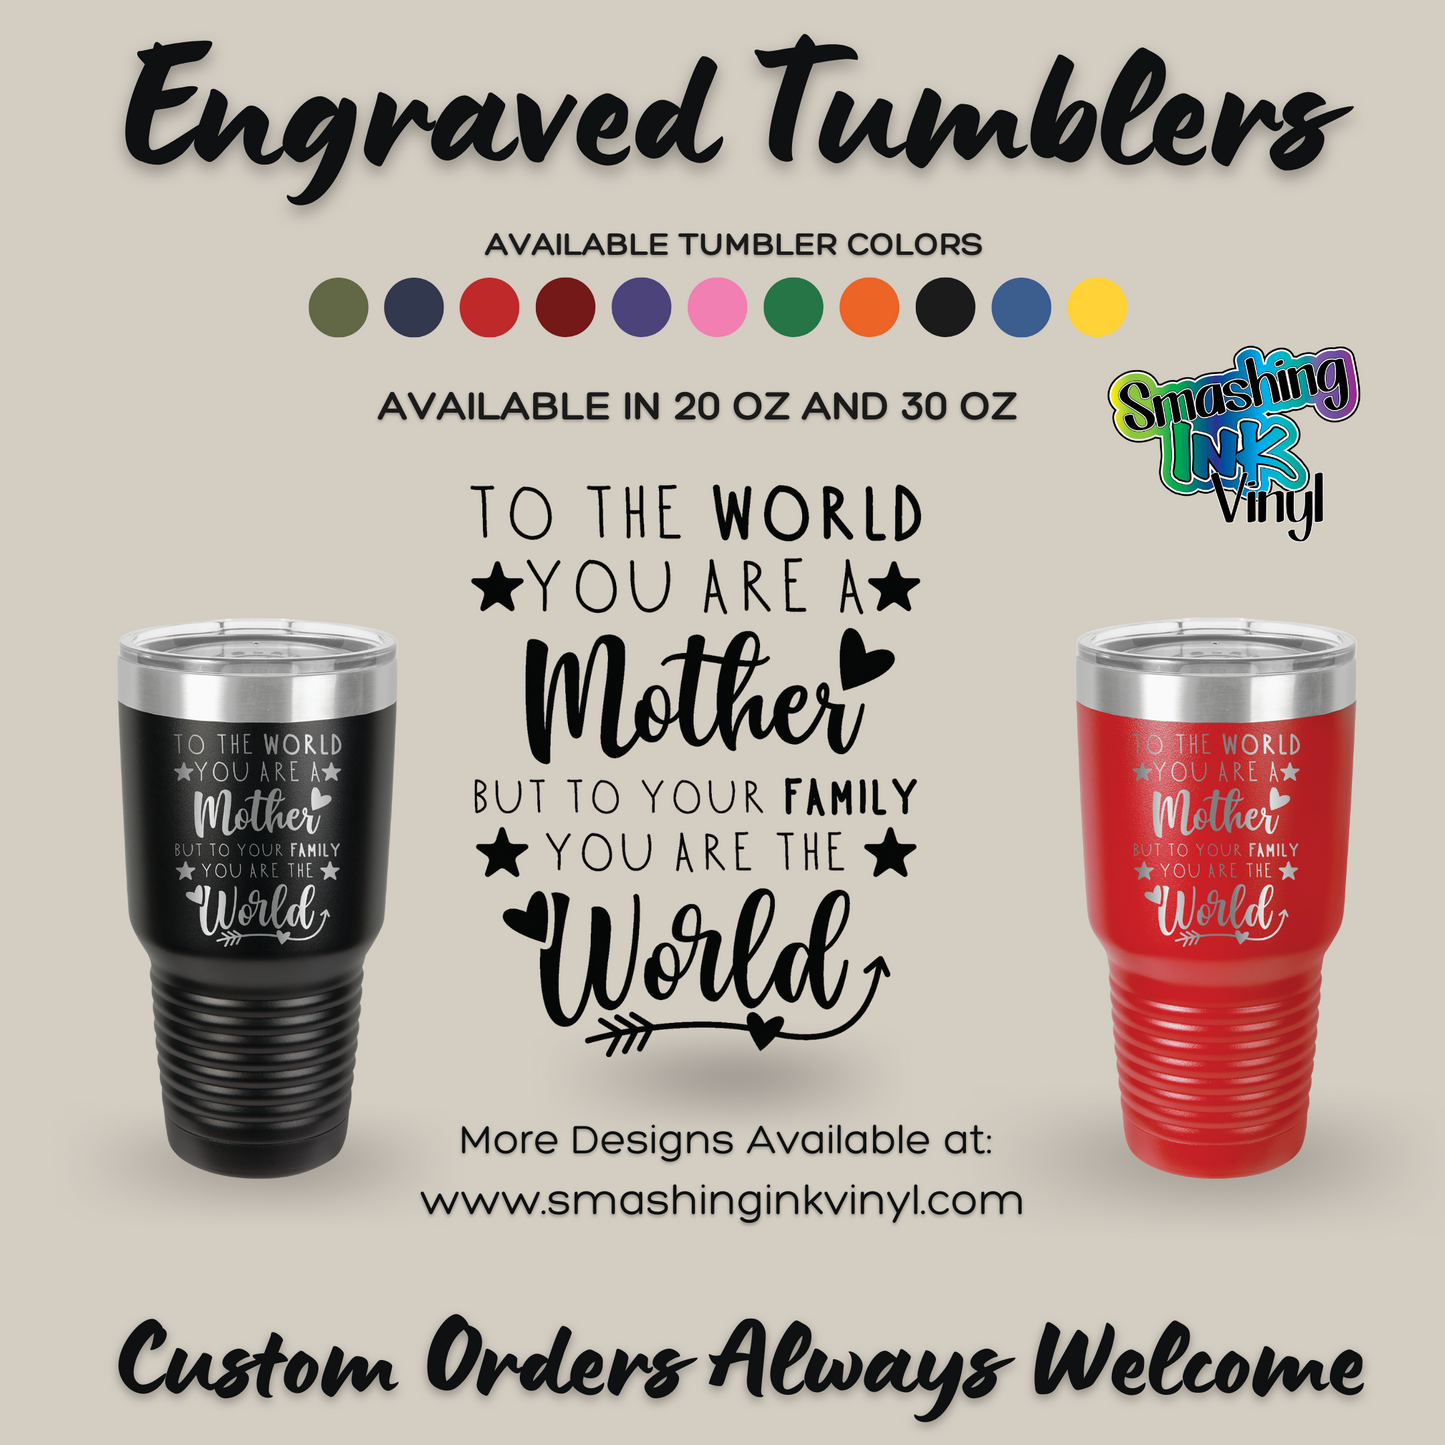 To The World You Are A Mother - Engraved Tumblers (TAT 3-5 BUS DAYS)